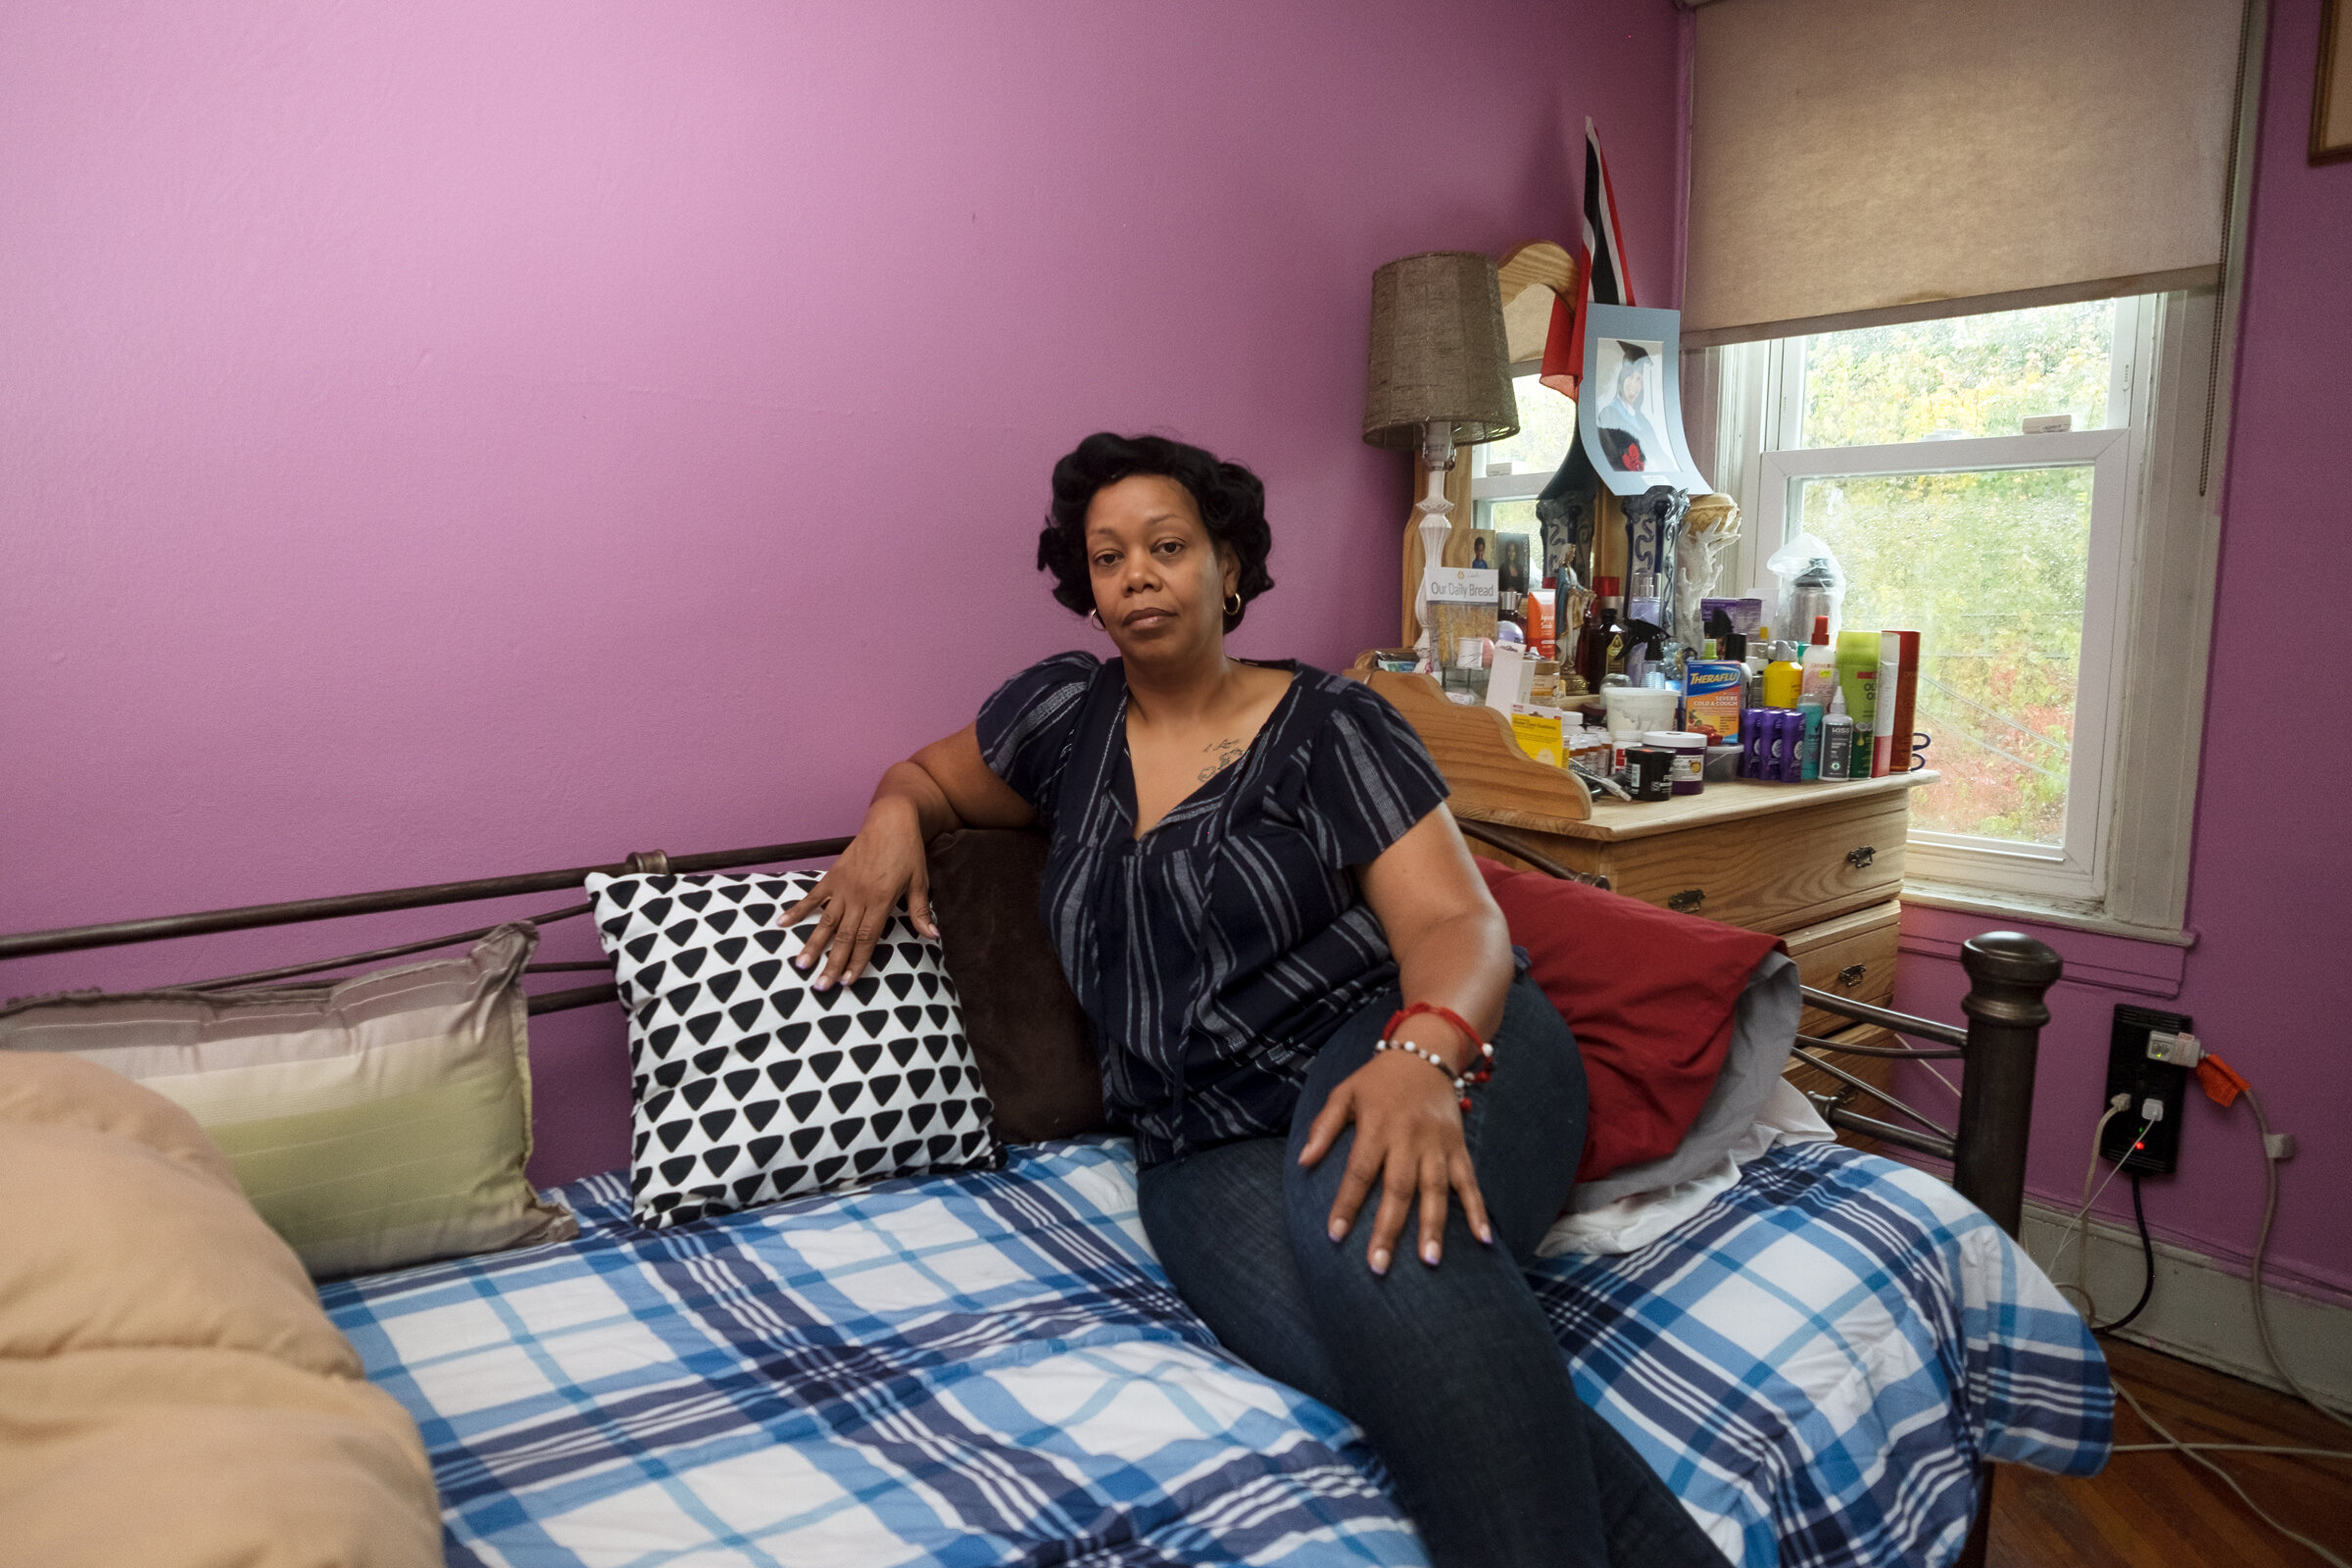 Leah in her bedroom in her mother’s house, 9 months after her release. Brooklyn, NY (2019)